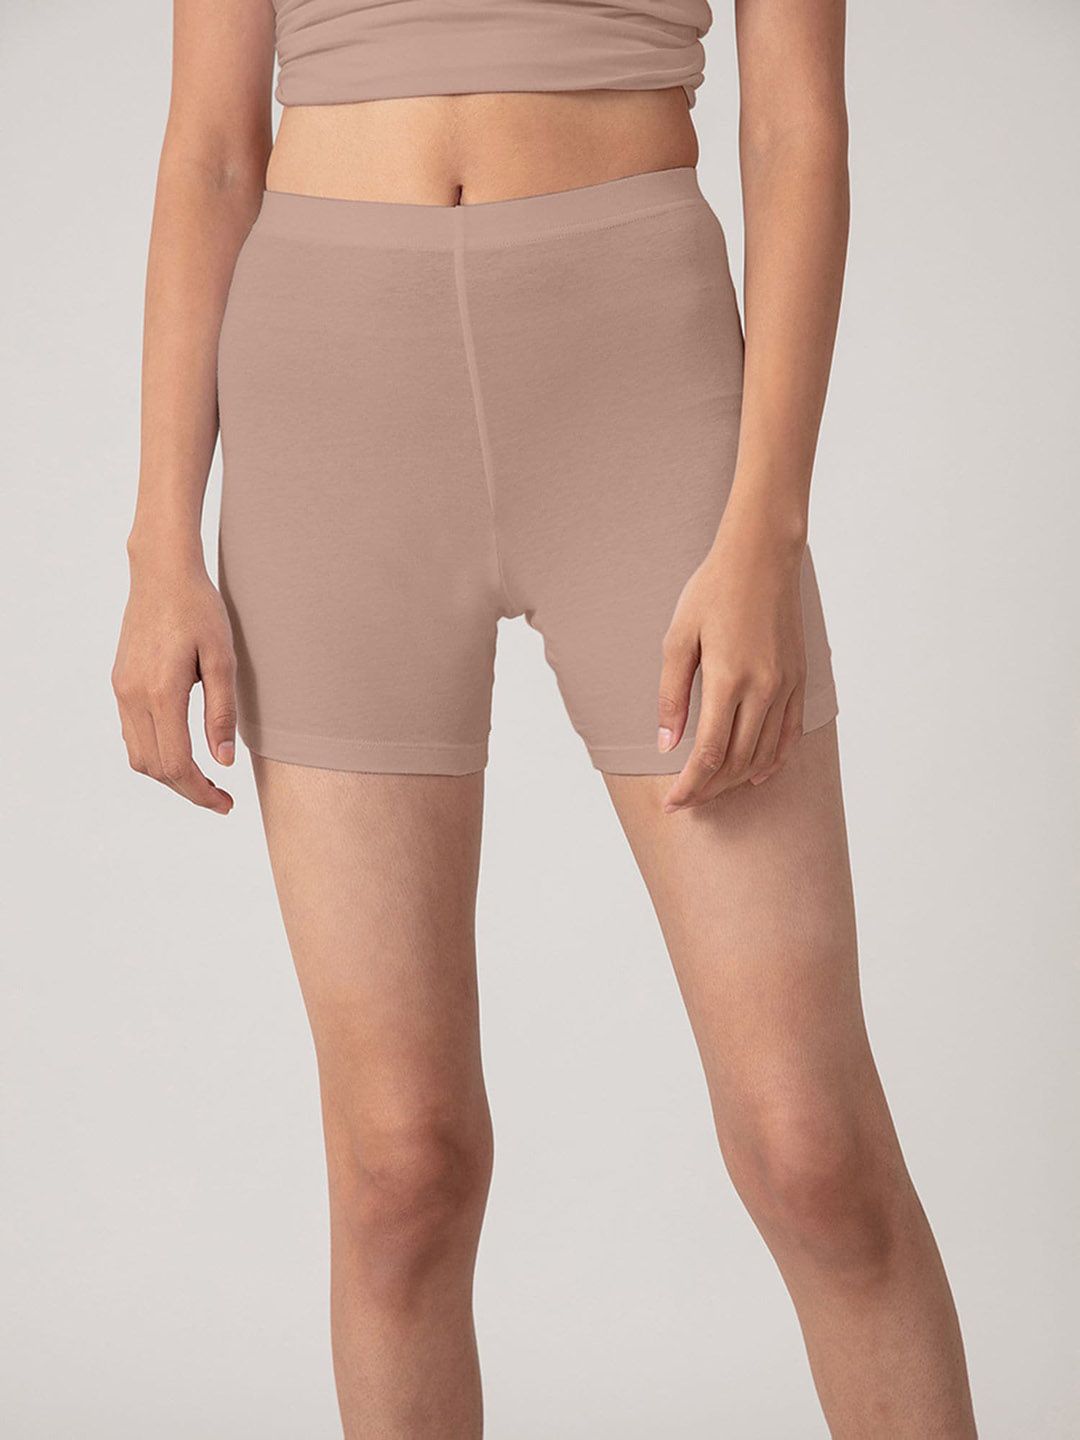 Nykd Women Nude-Coloured Shorts Price in India